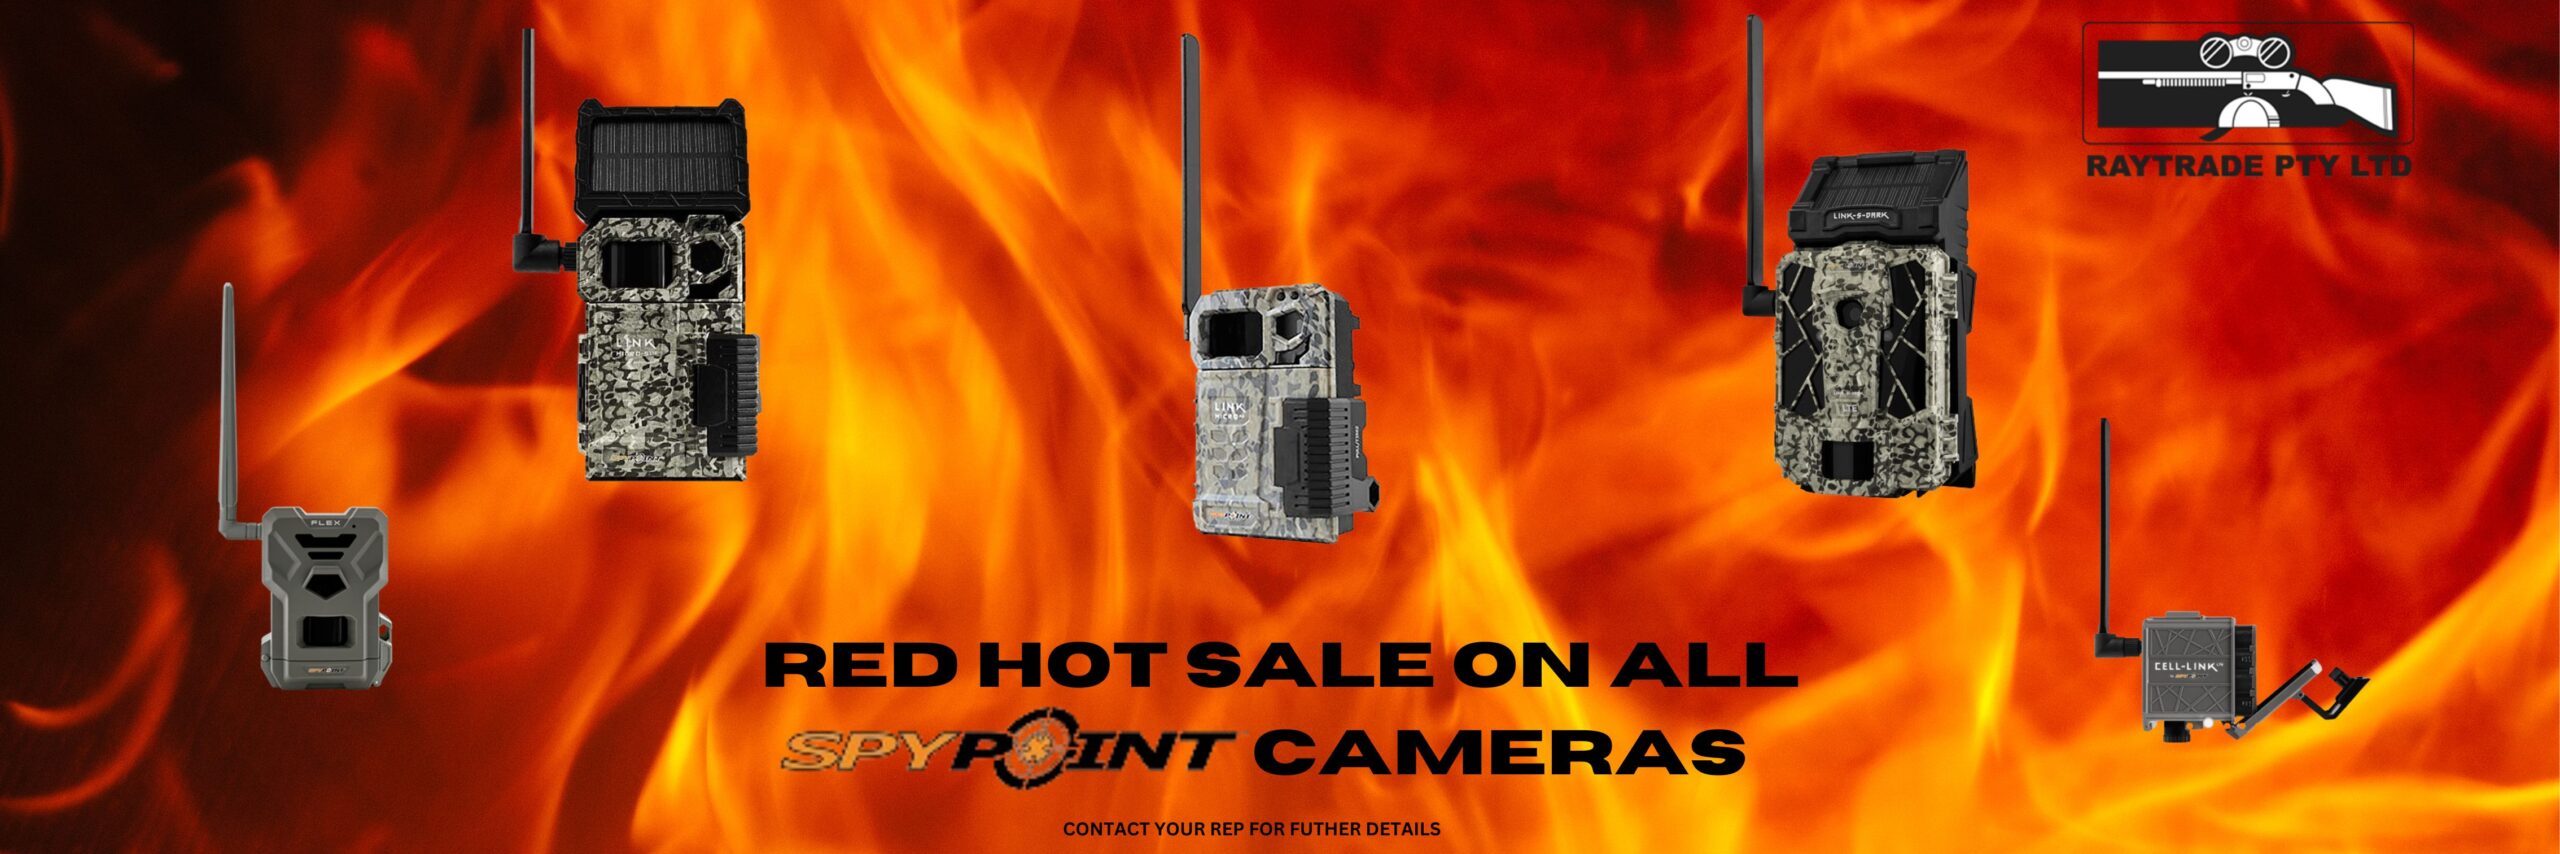 Spypoint red hot sale banner